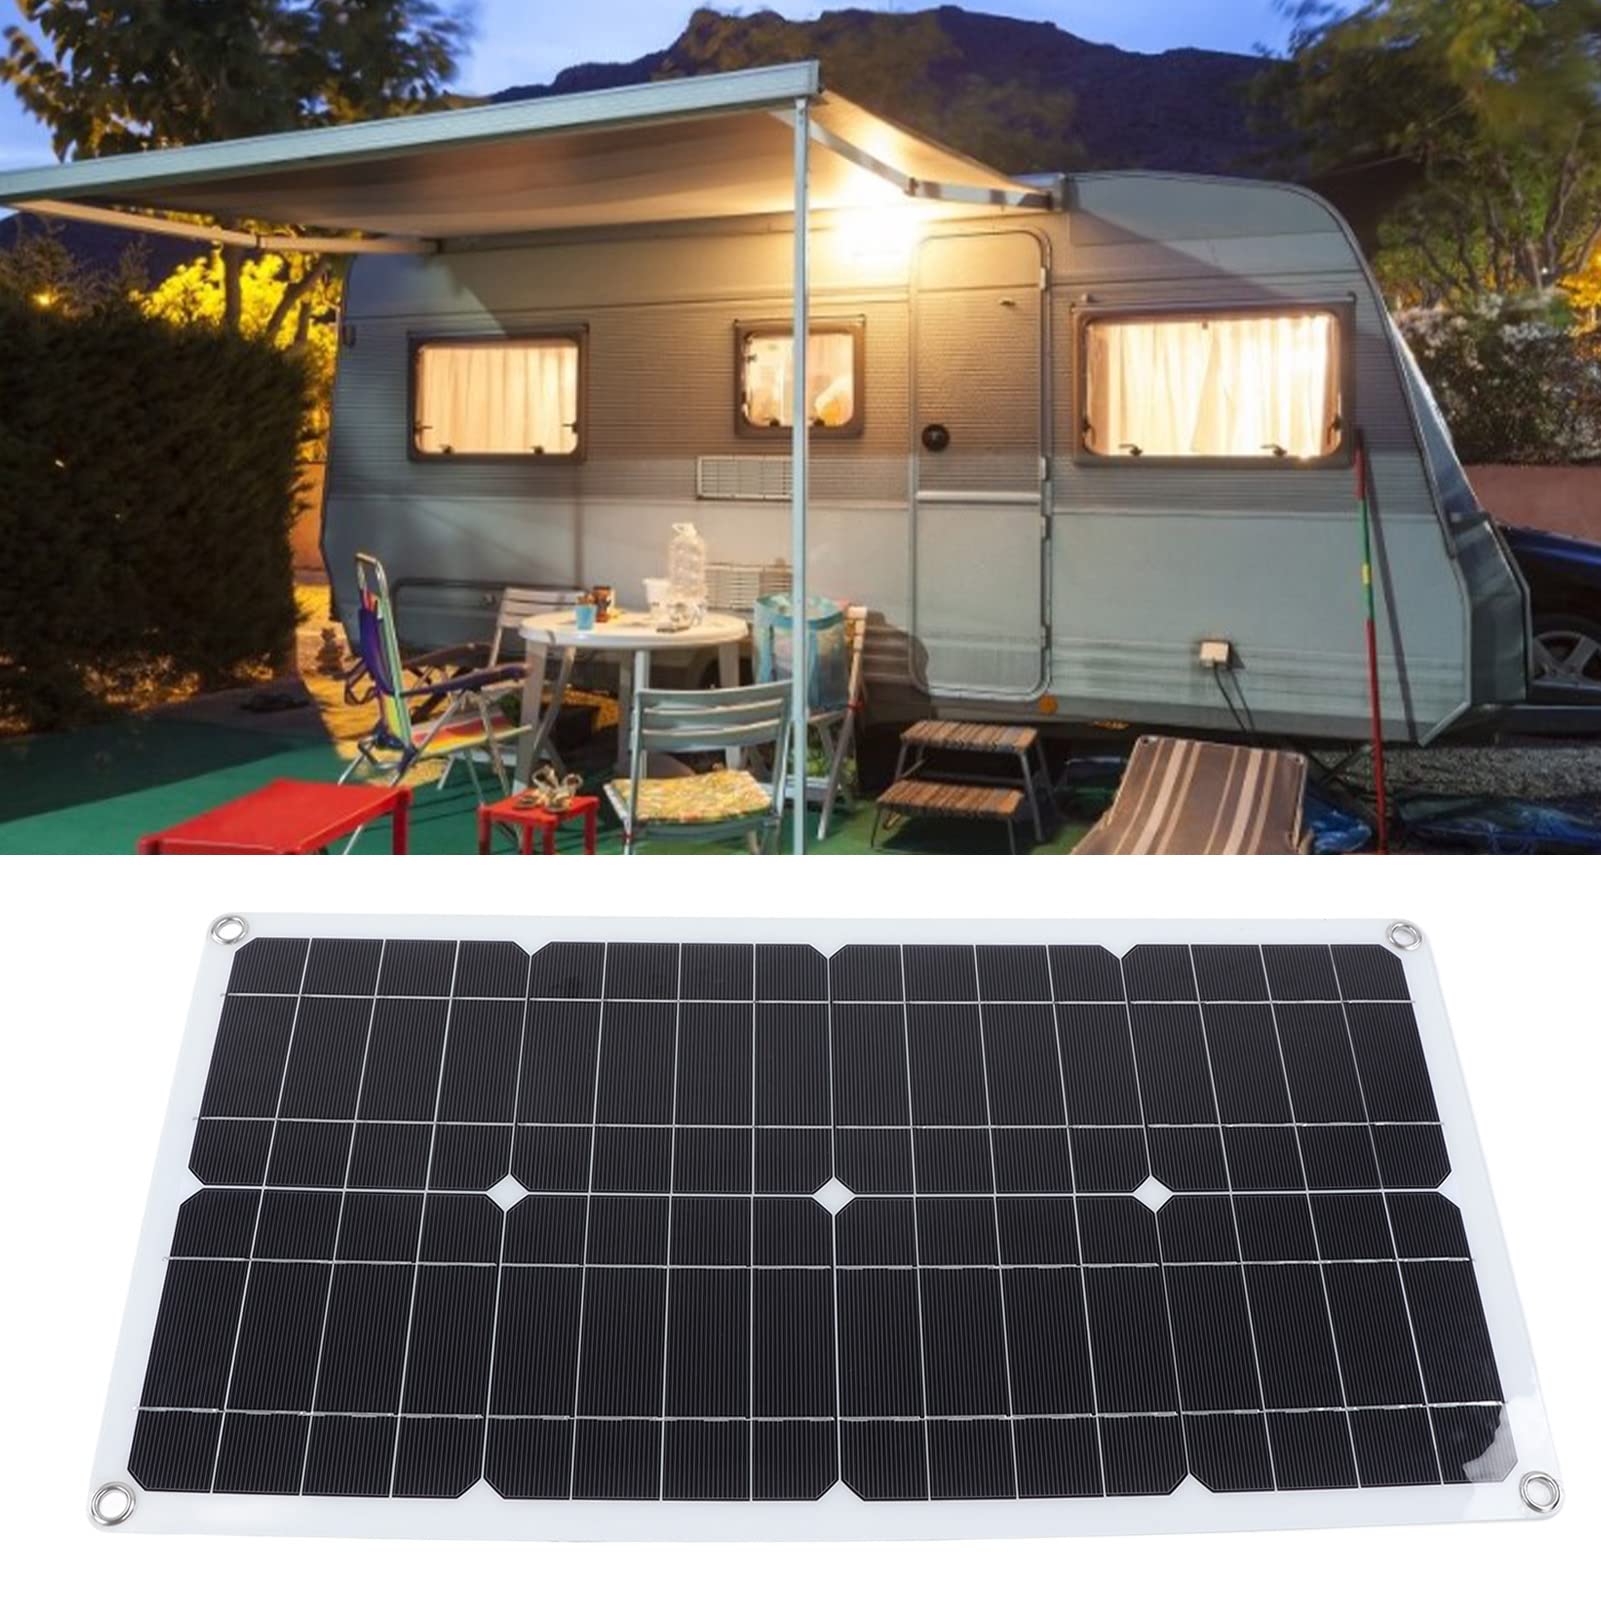 Solar Battery, 250W Monocrystalline Solar Panel Kit Dual USB Ports Solar Powered with 10A Charge Controller for RV Car Boat Emergency Charging, 12V Battery Charging, etc, RV